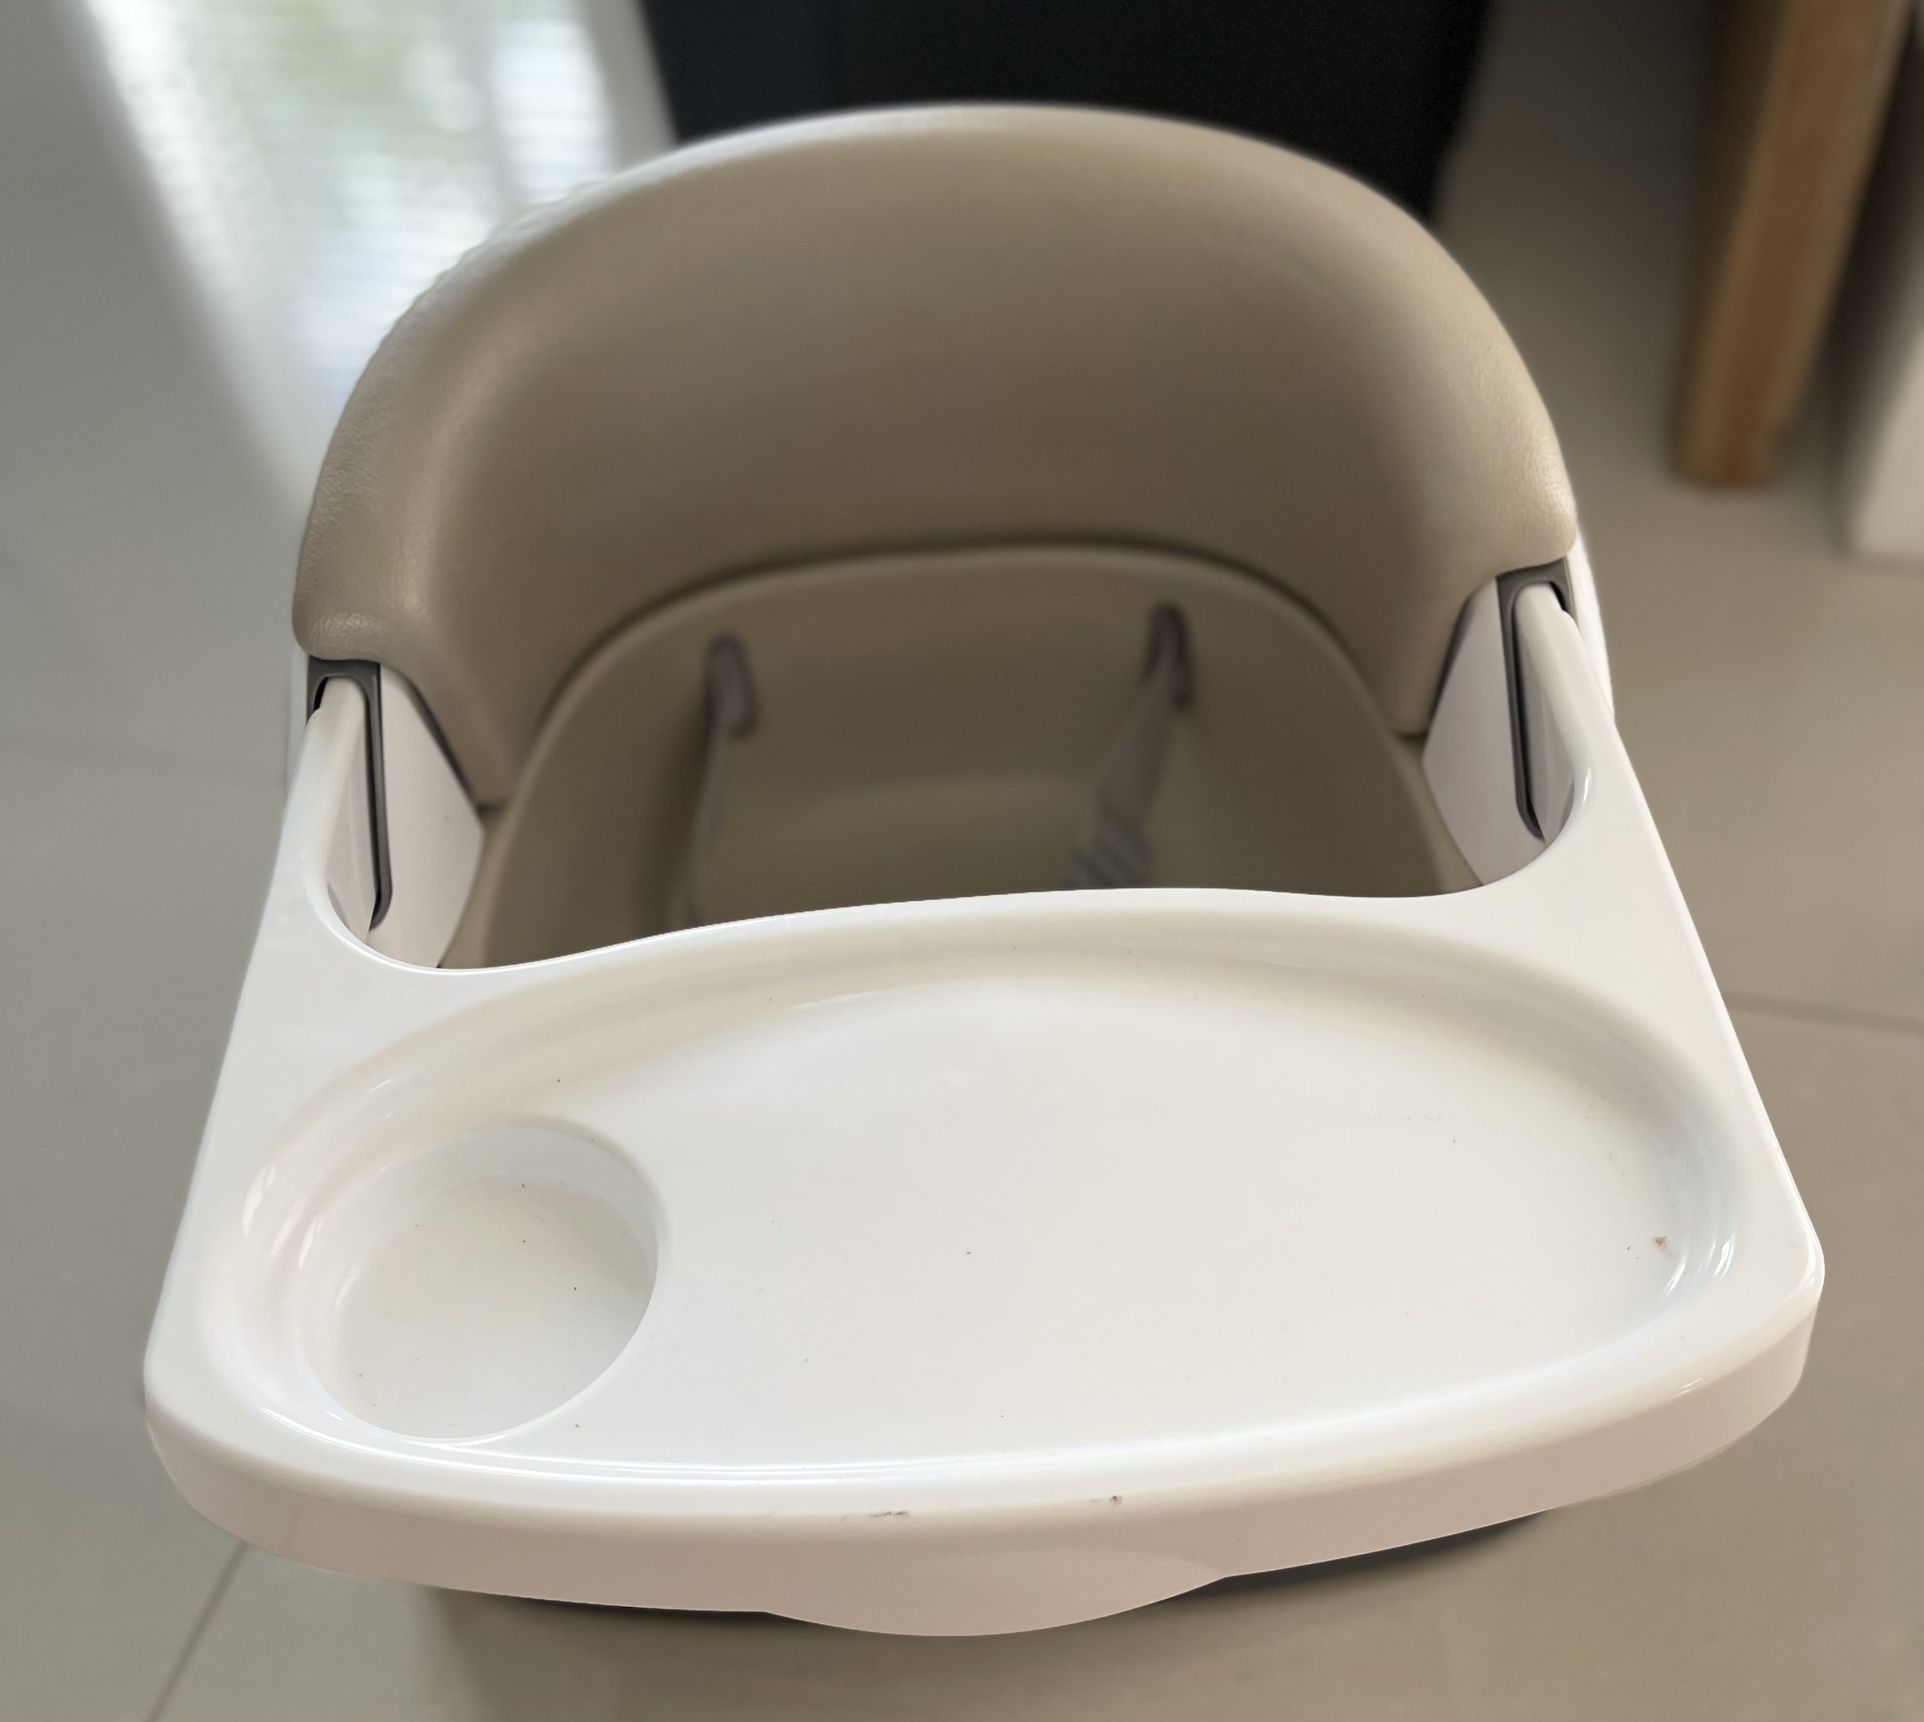 baby eating chair